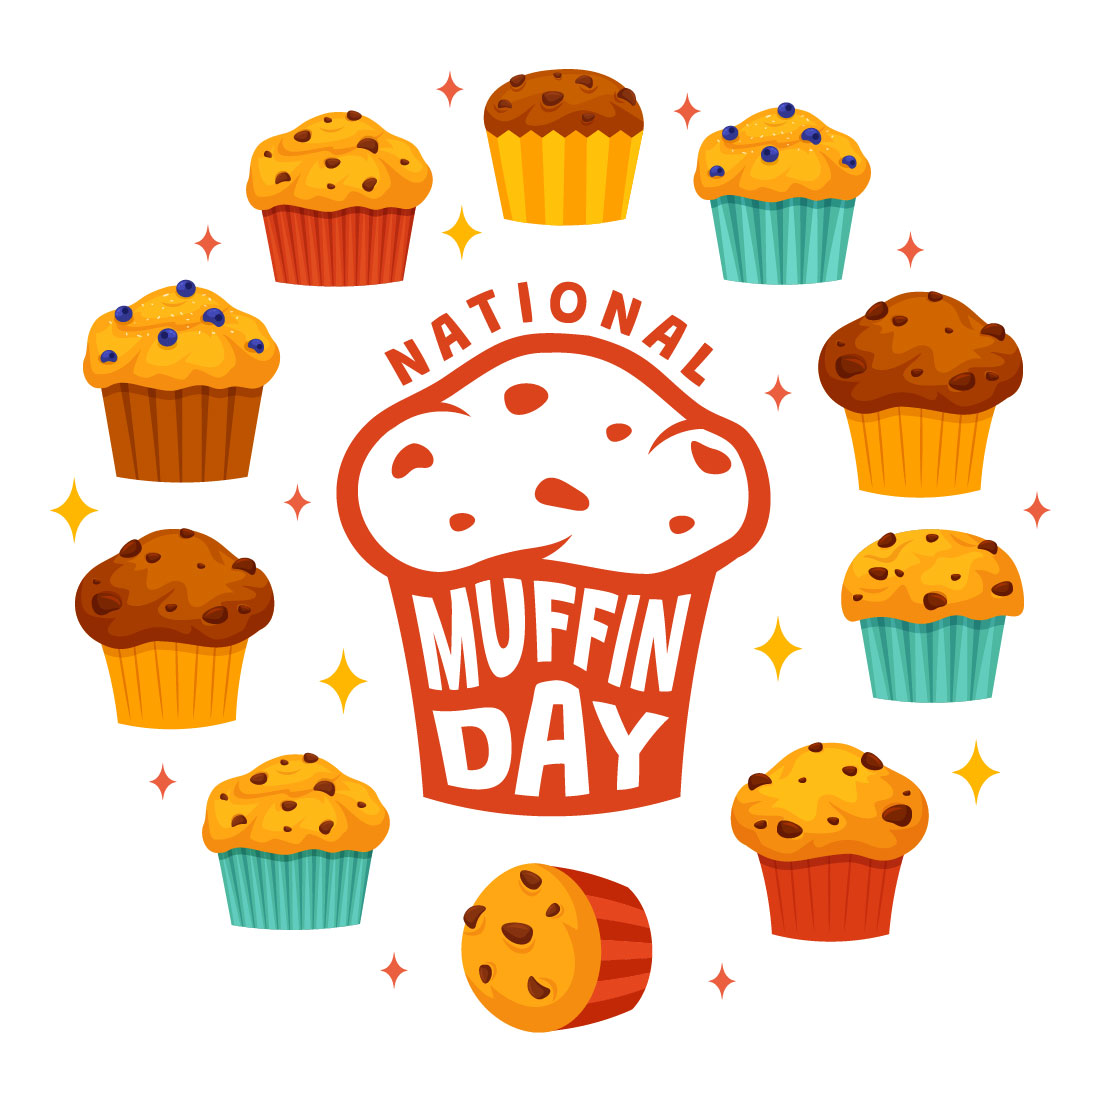 12 National Muffin Day Illustration preview image.